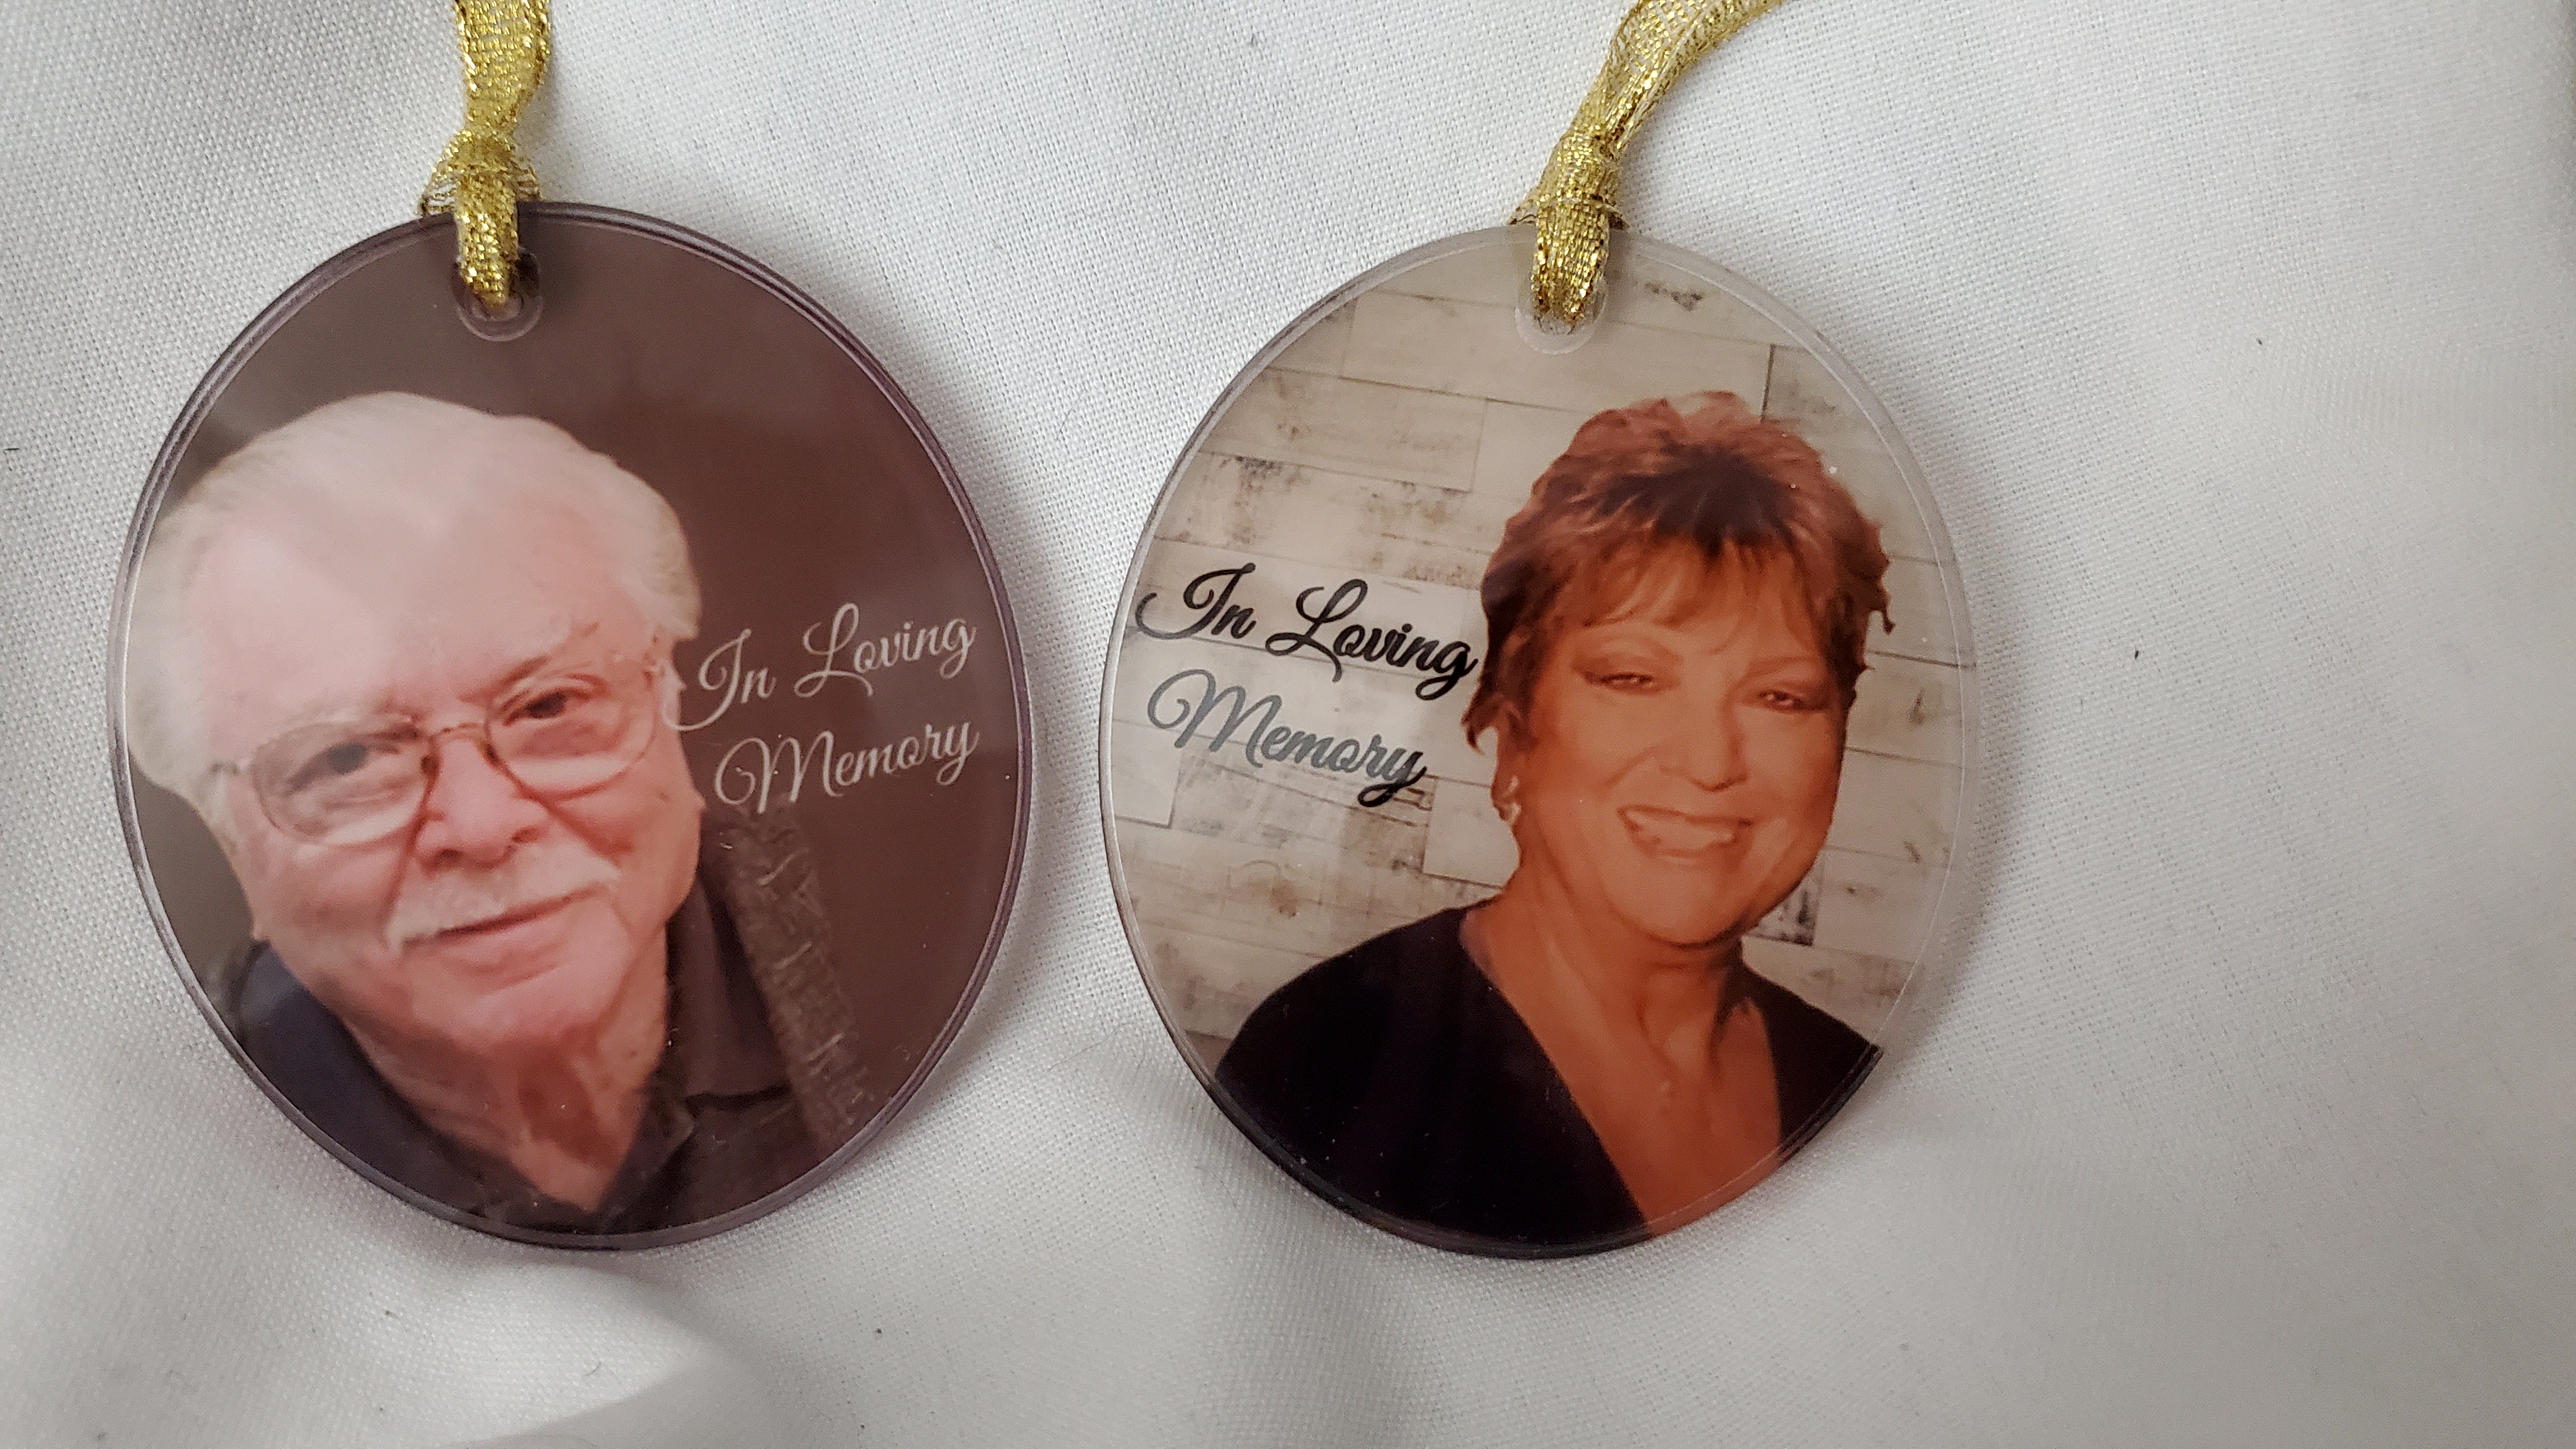 Acrylic Ornament made with sublimation printing